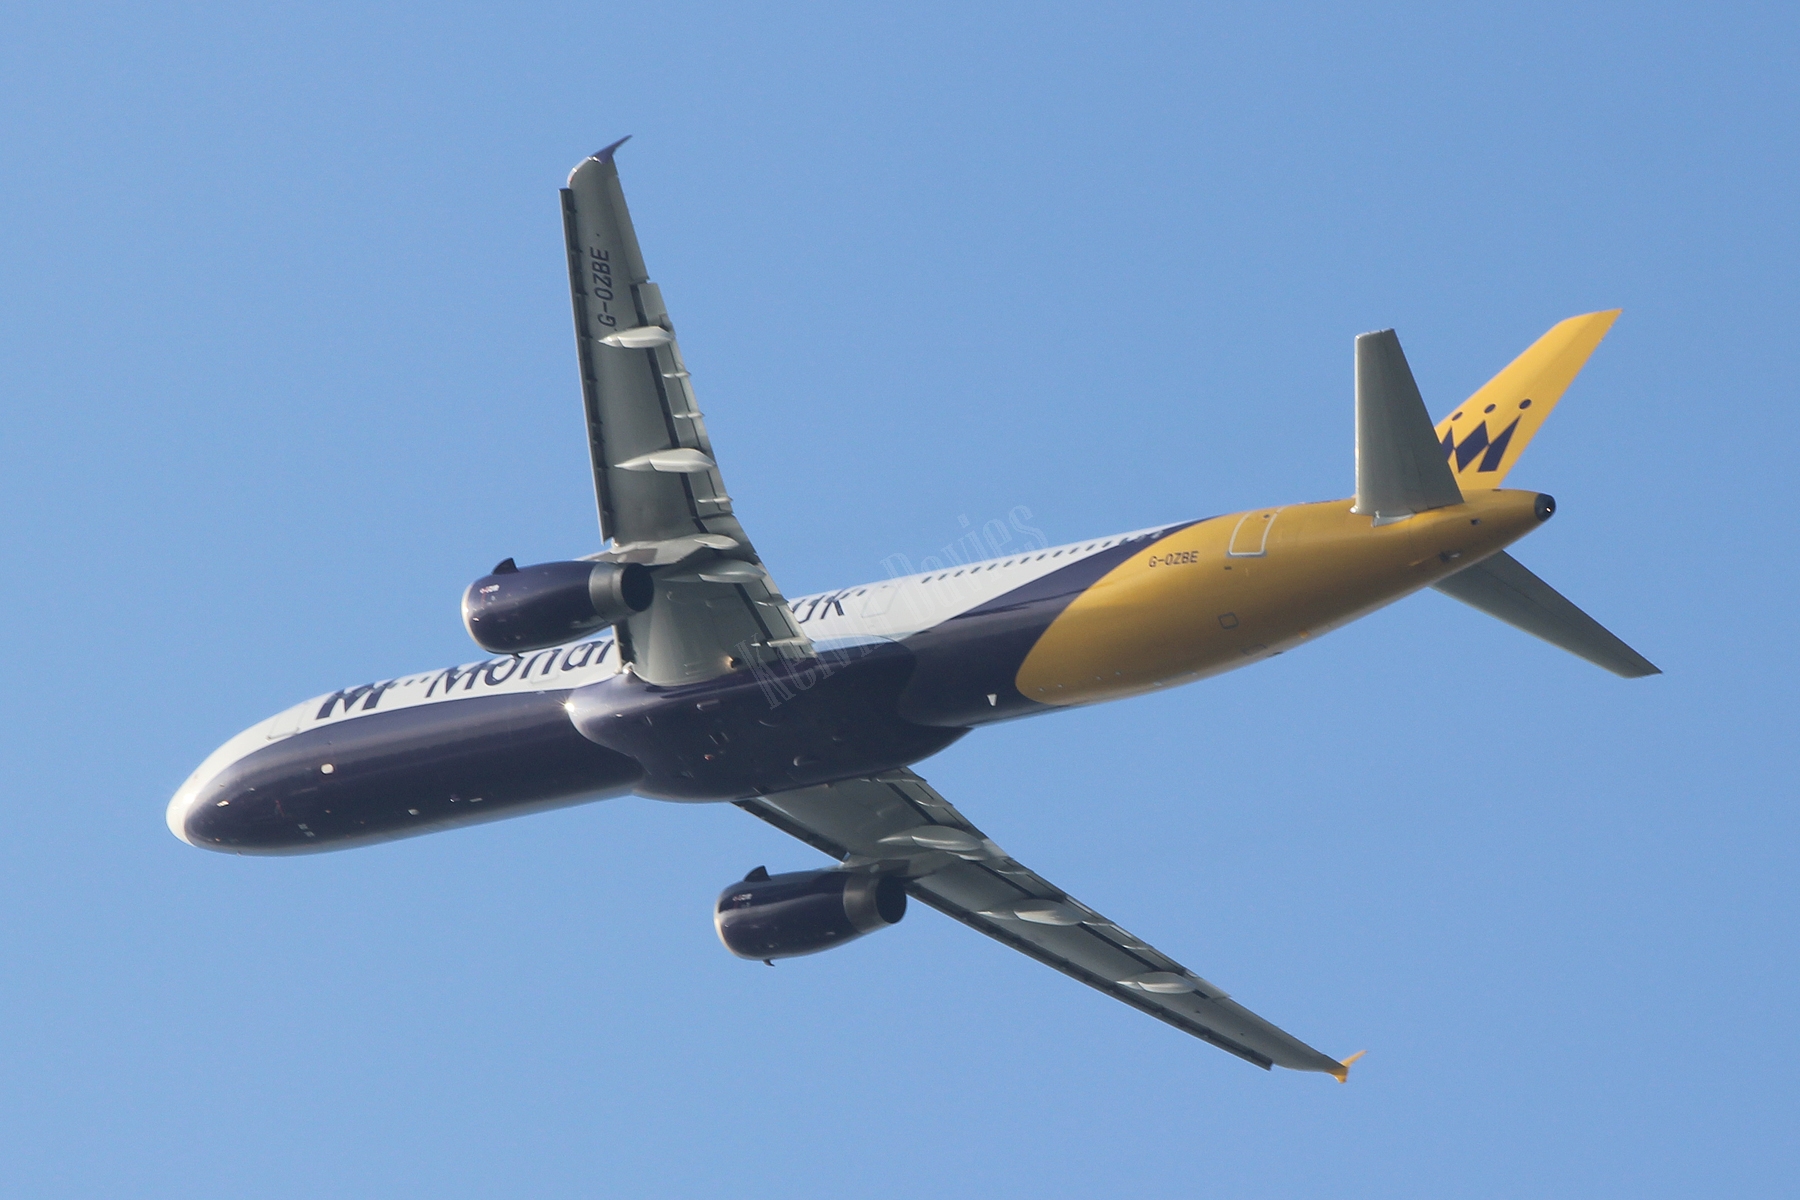 Monarch Airlines A321 G-OZBE